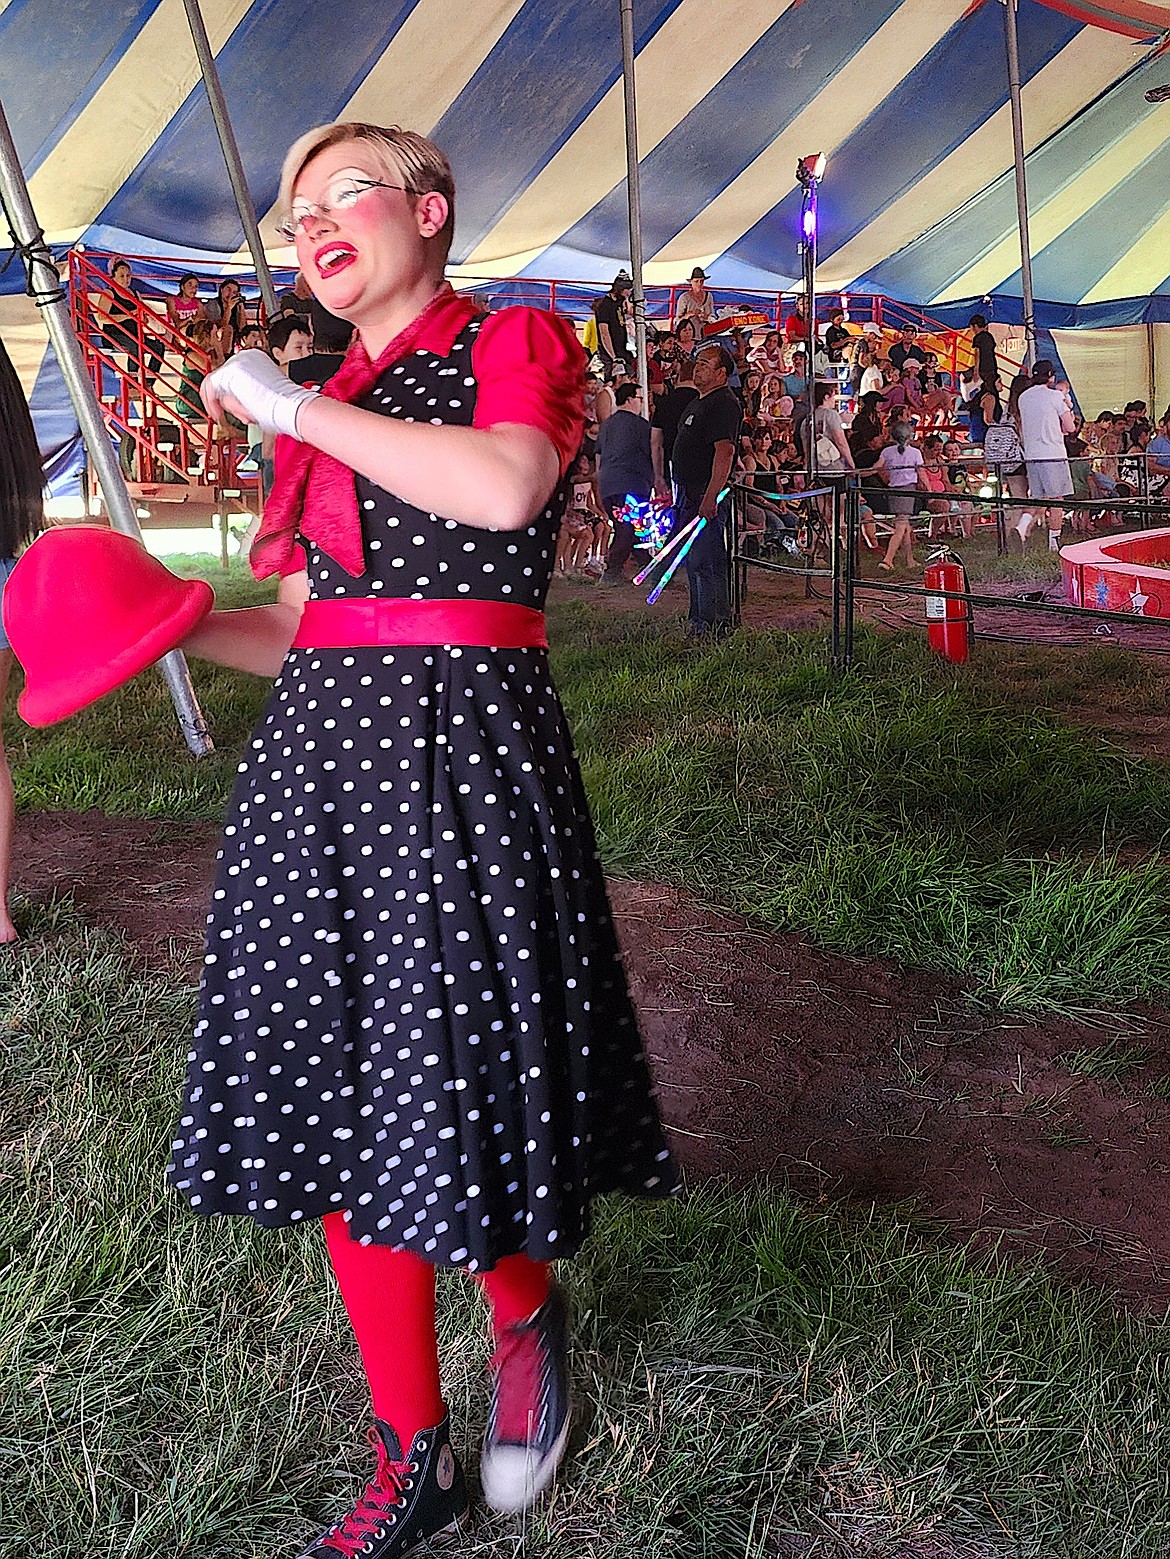 Holly, a clown with the Culpepper & Merryweather Circus, greeted people as they entered the big top on Sunday. (Berl Tiskus/Leader)